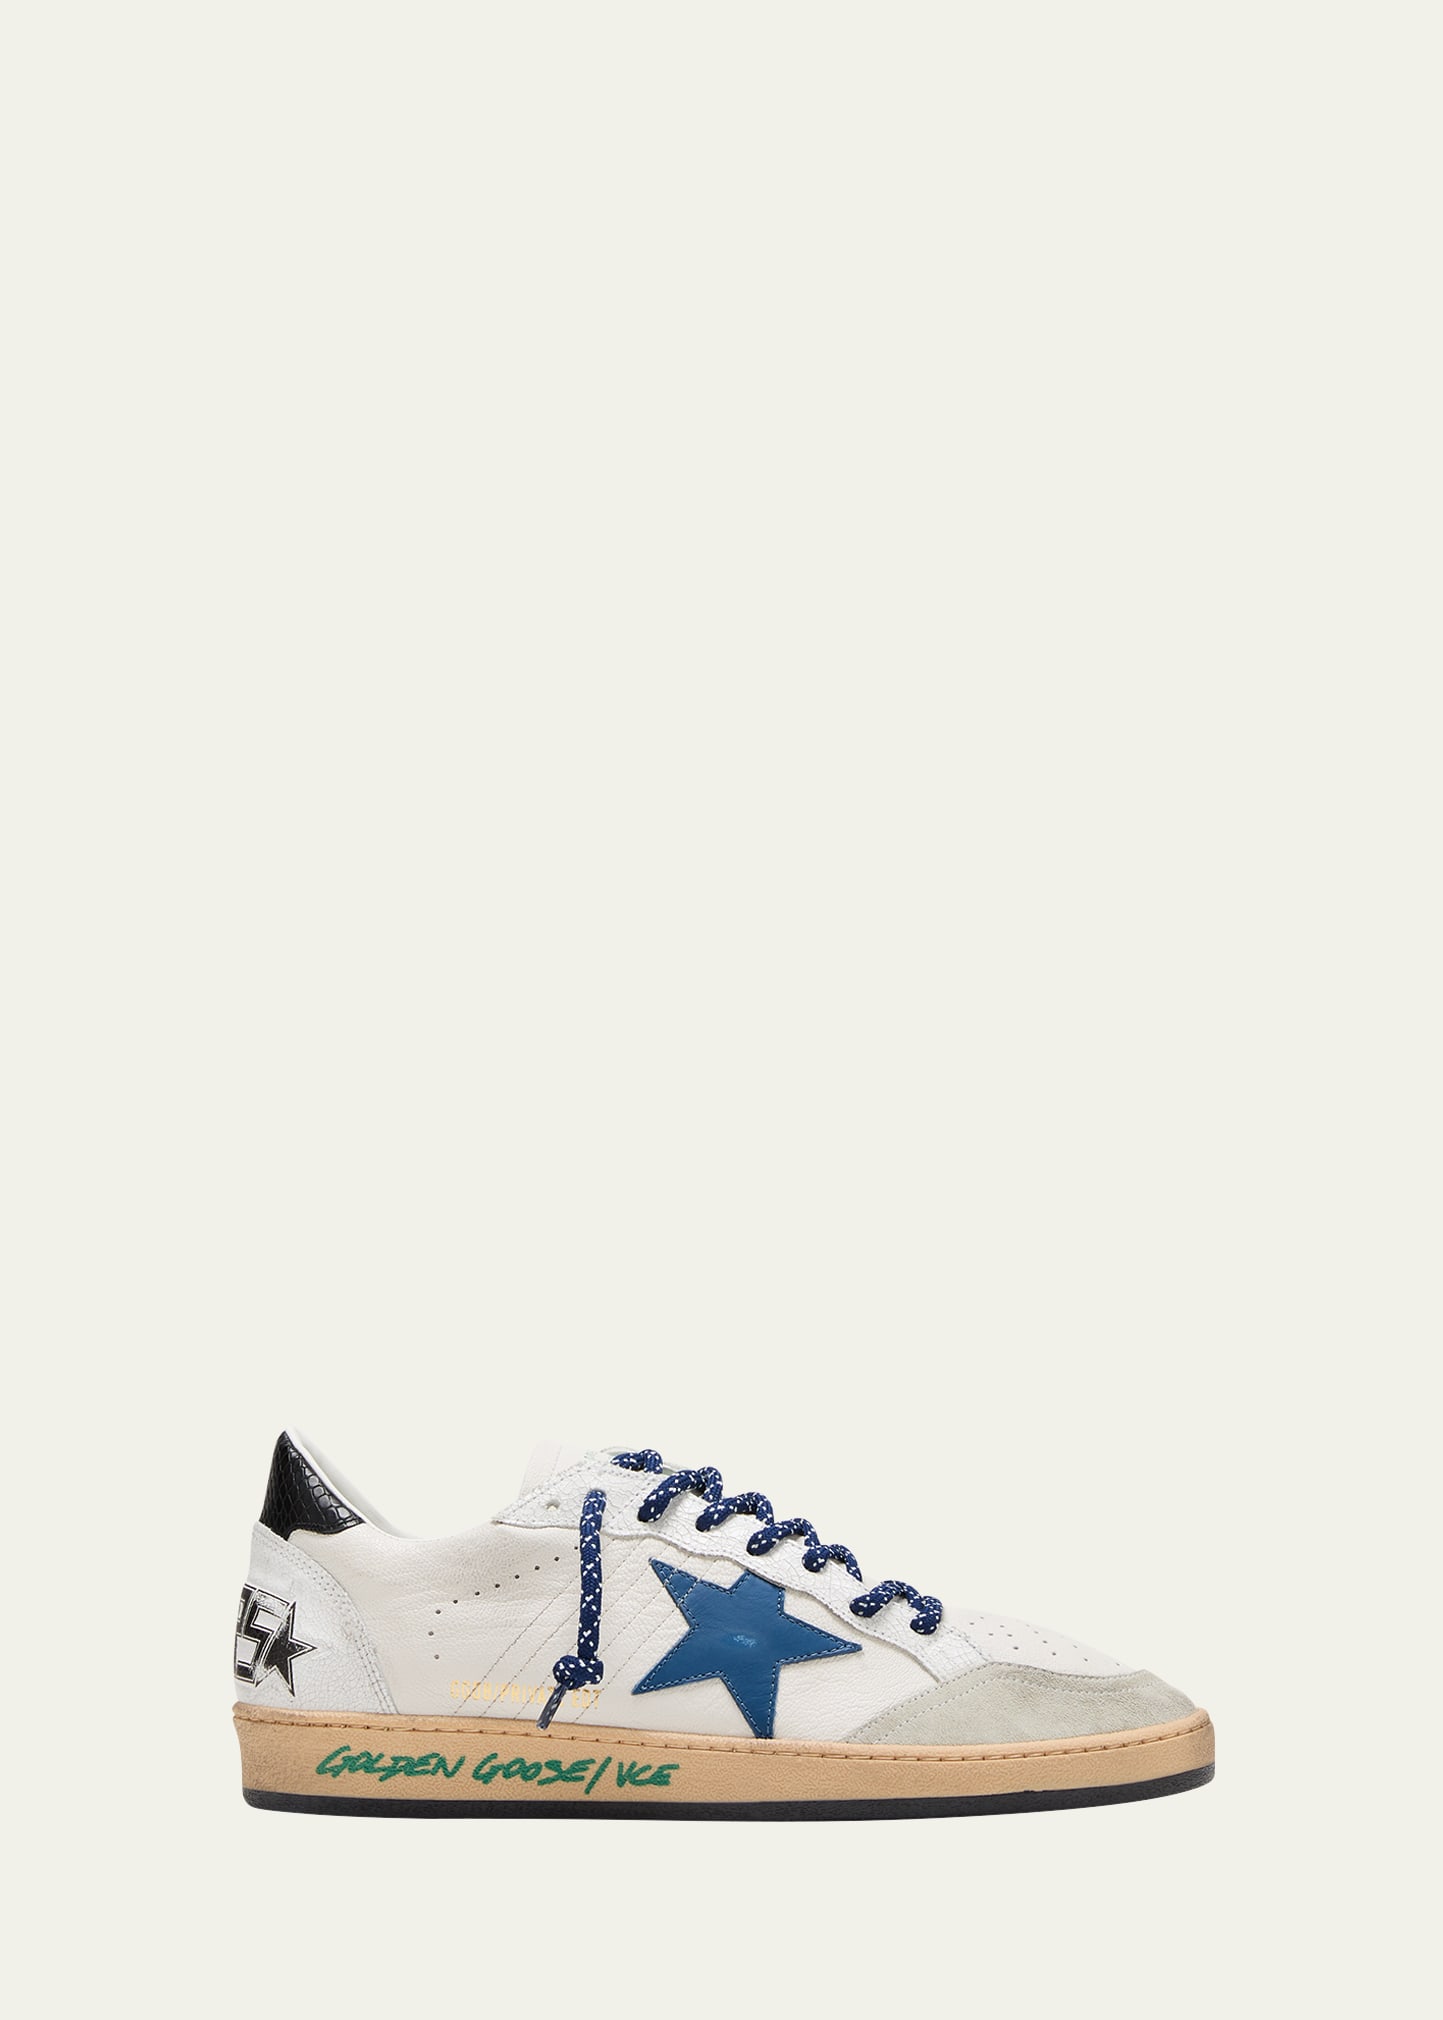 Golden Goose Men's Ball Star Leather Low-top Sneakers In White/blue Ocean/